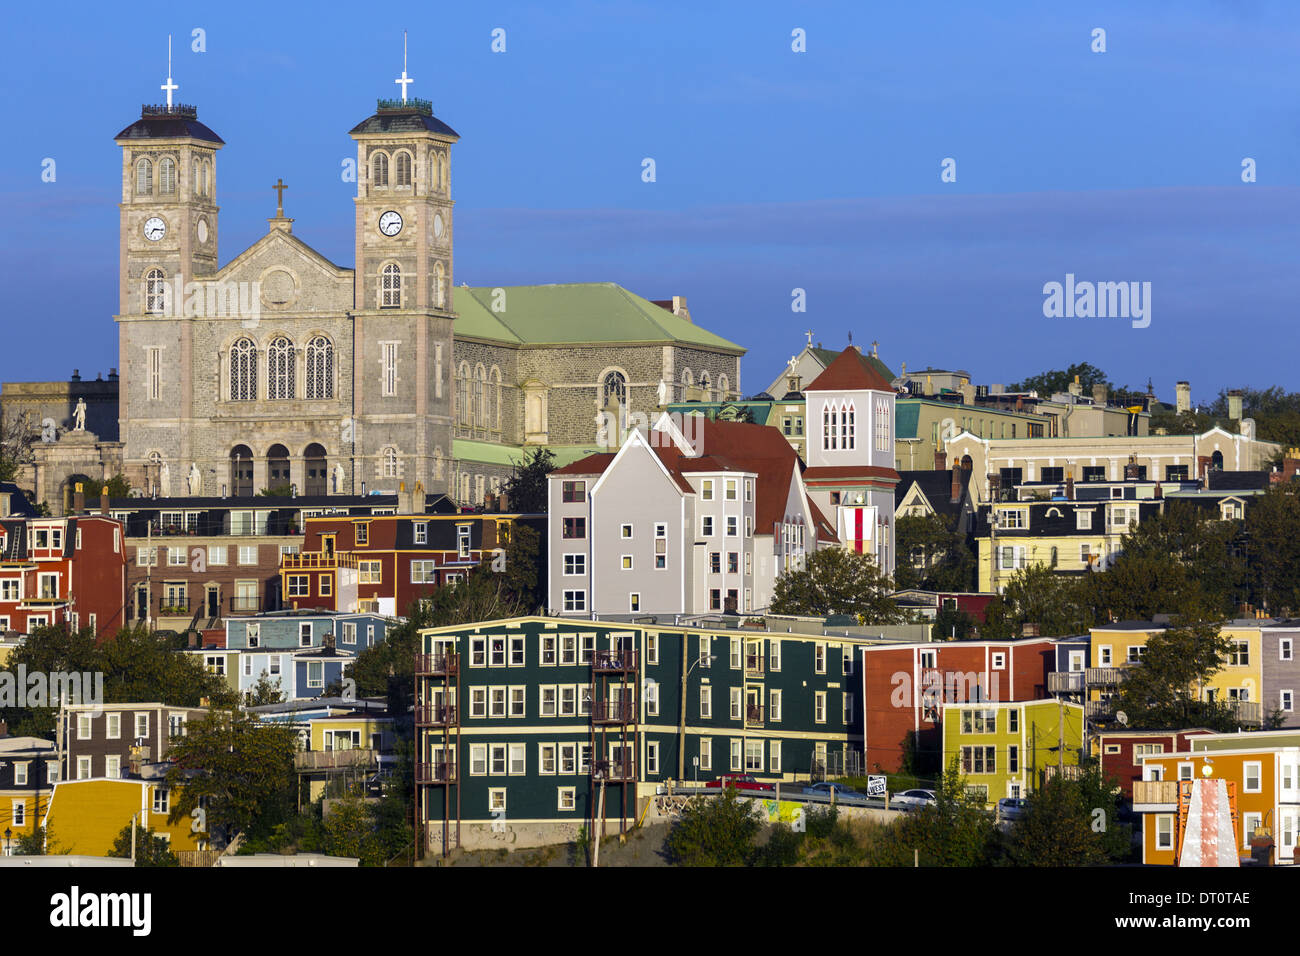 Anglican Cathedral of St. John the Baptist overlooks the coloured houses of downtown town of St John's, Newfoundland, Canada Stock Photo